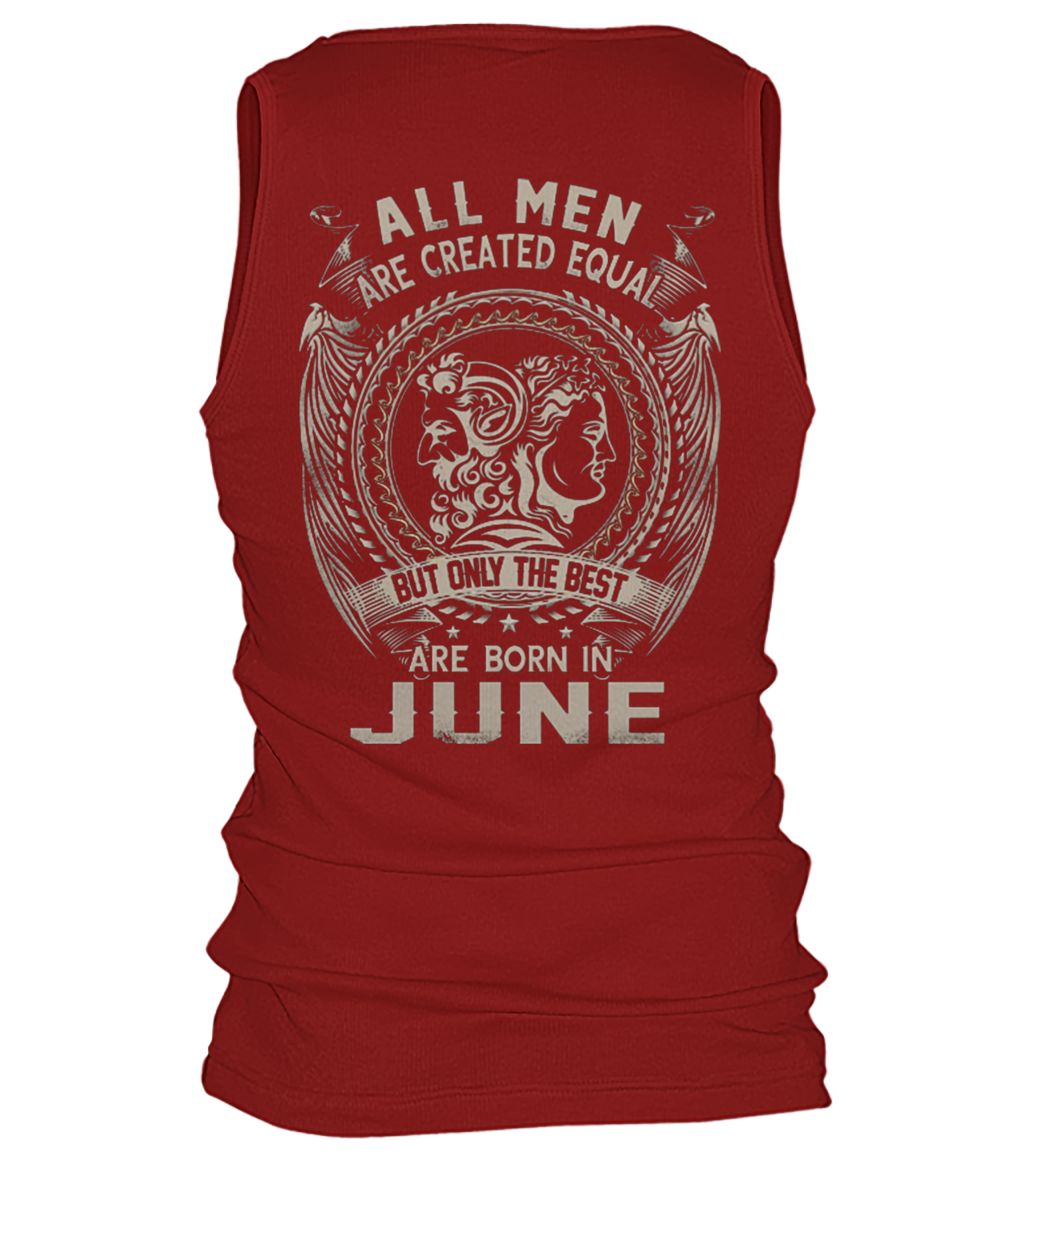 All men are created equal but only the best are born in june men's tank top